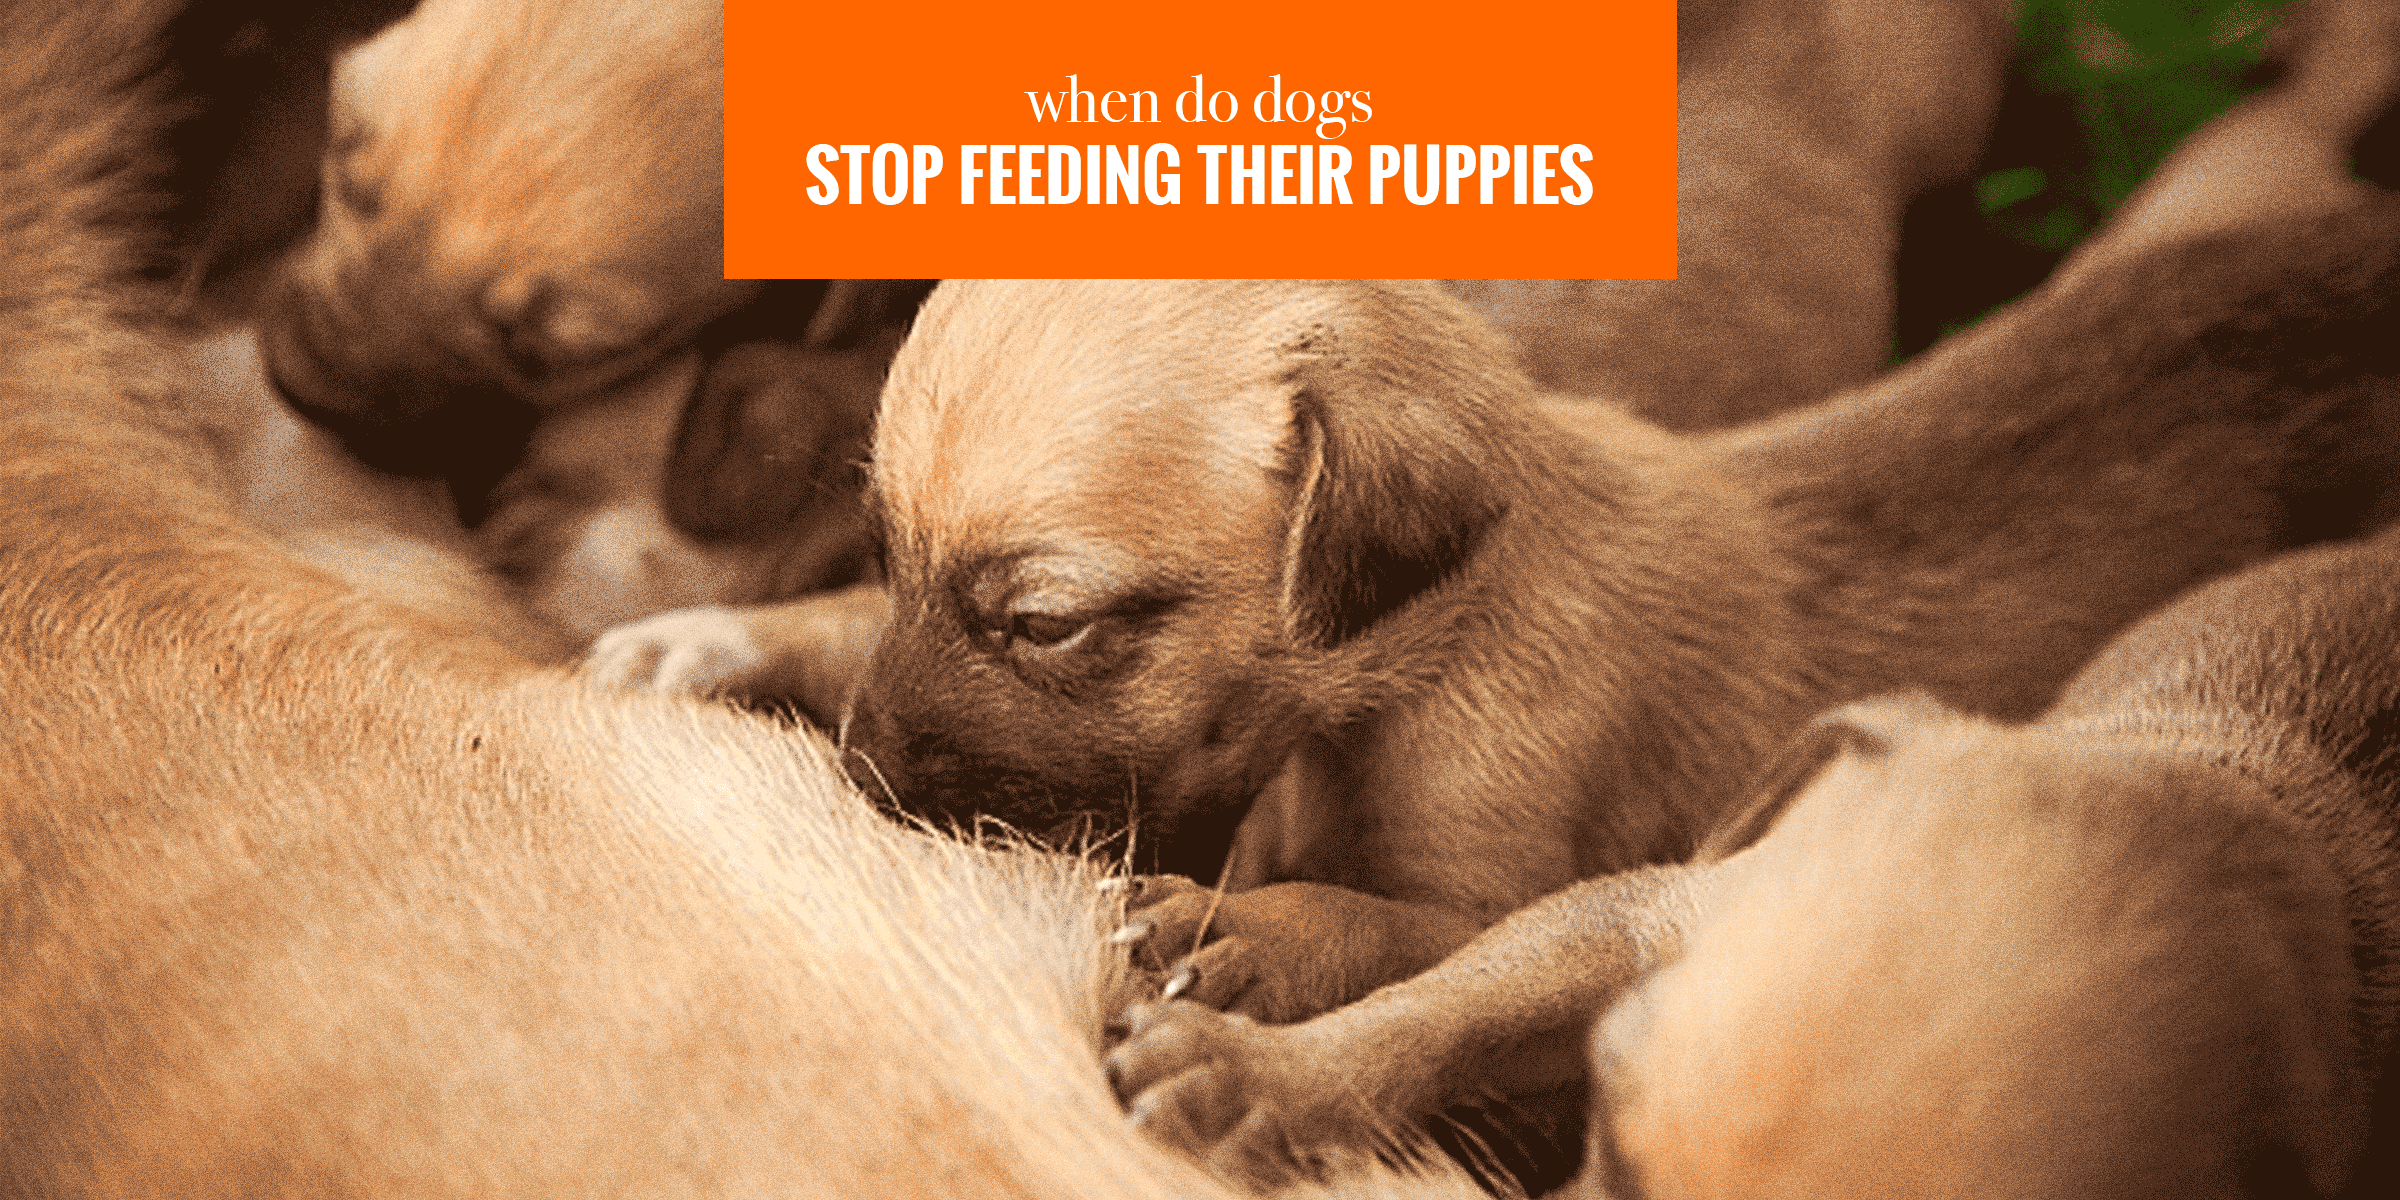 When Do Dogs Stop Feeding Their Puppies?